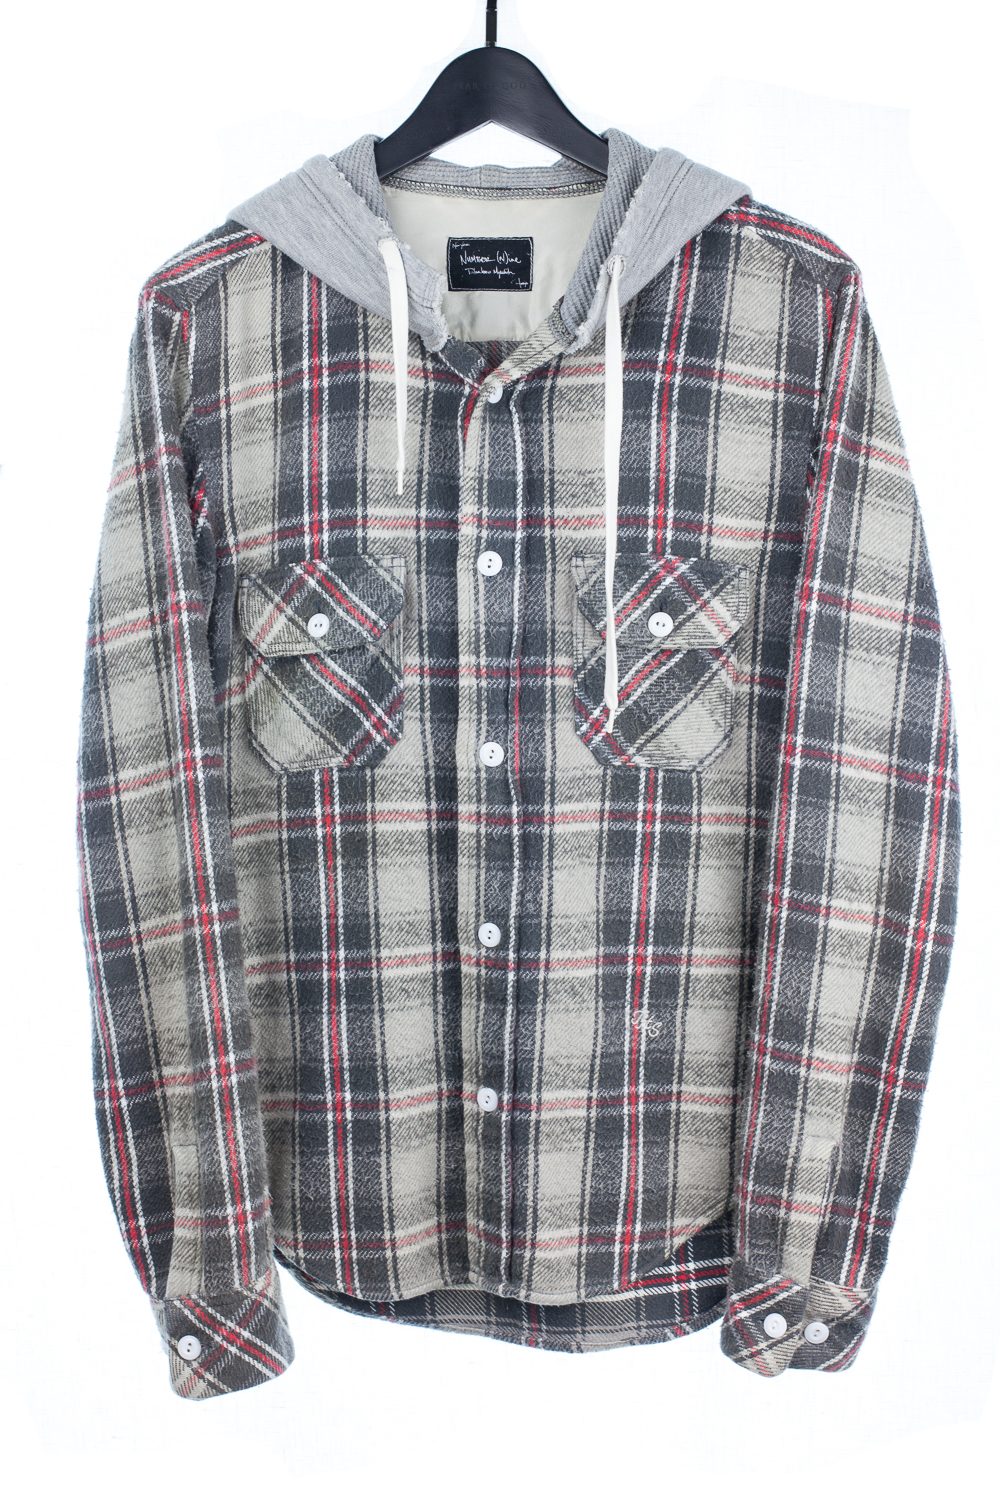 FW05 “The High Streets” Hooded Flannel